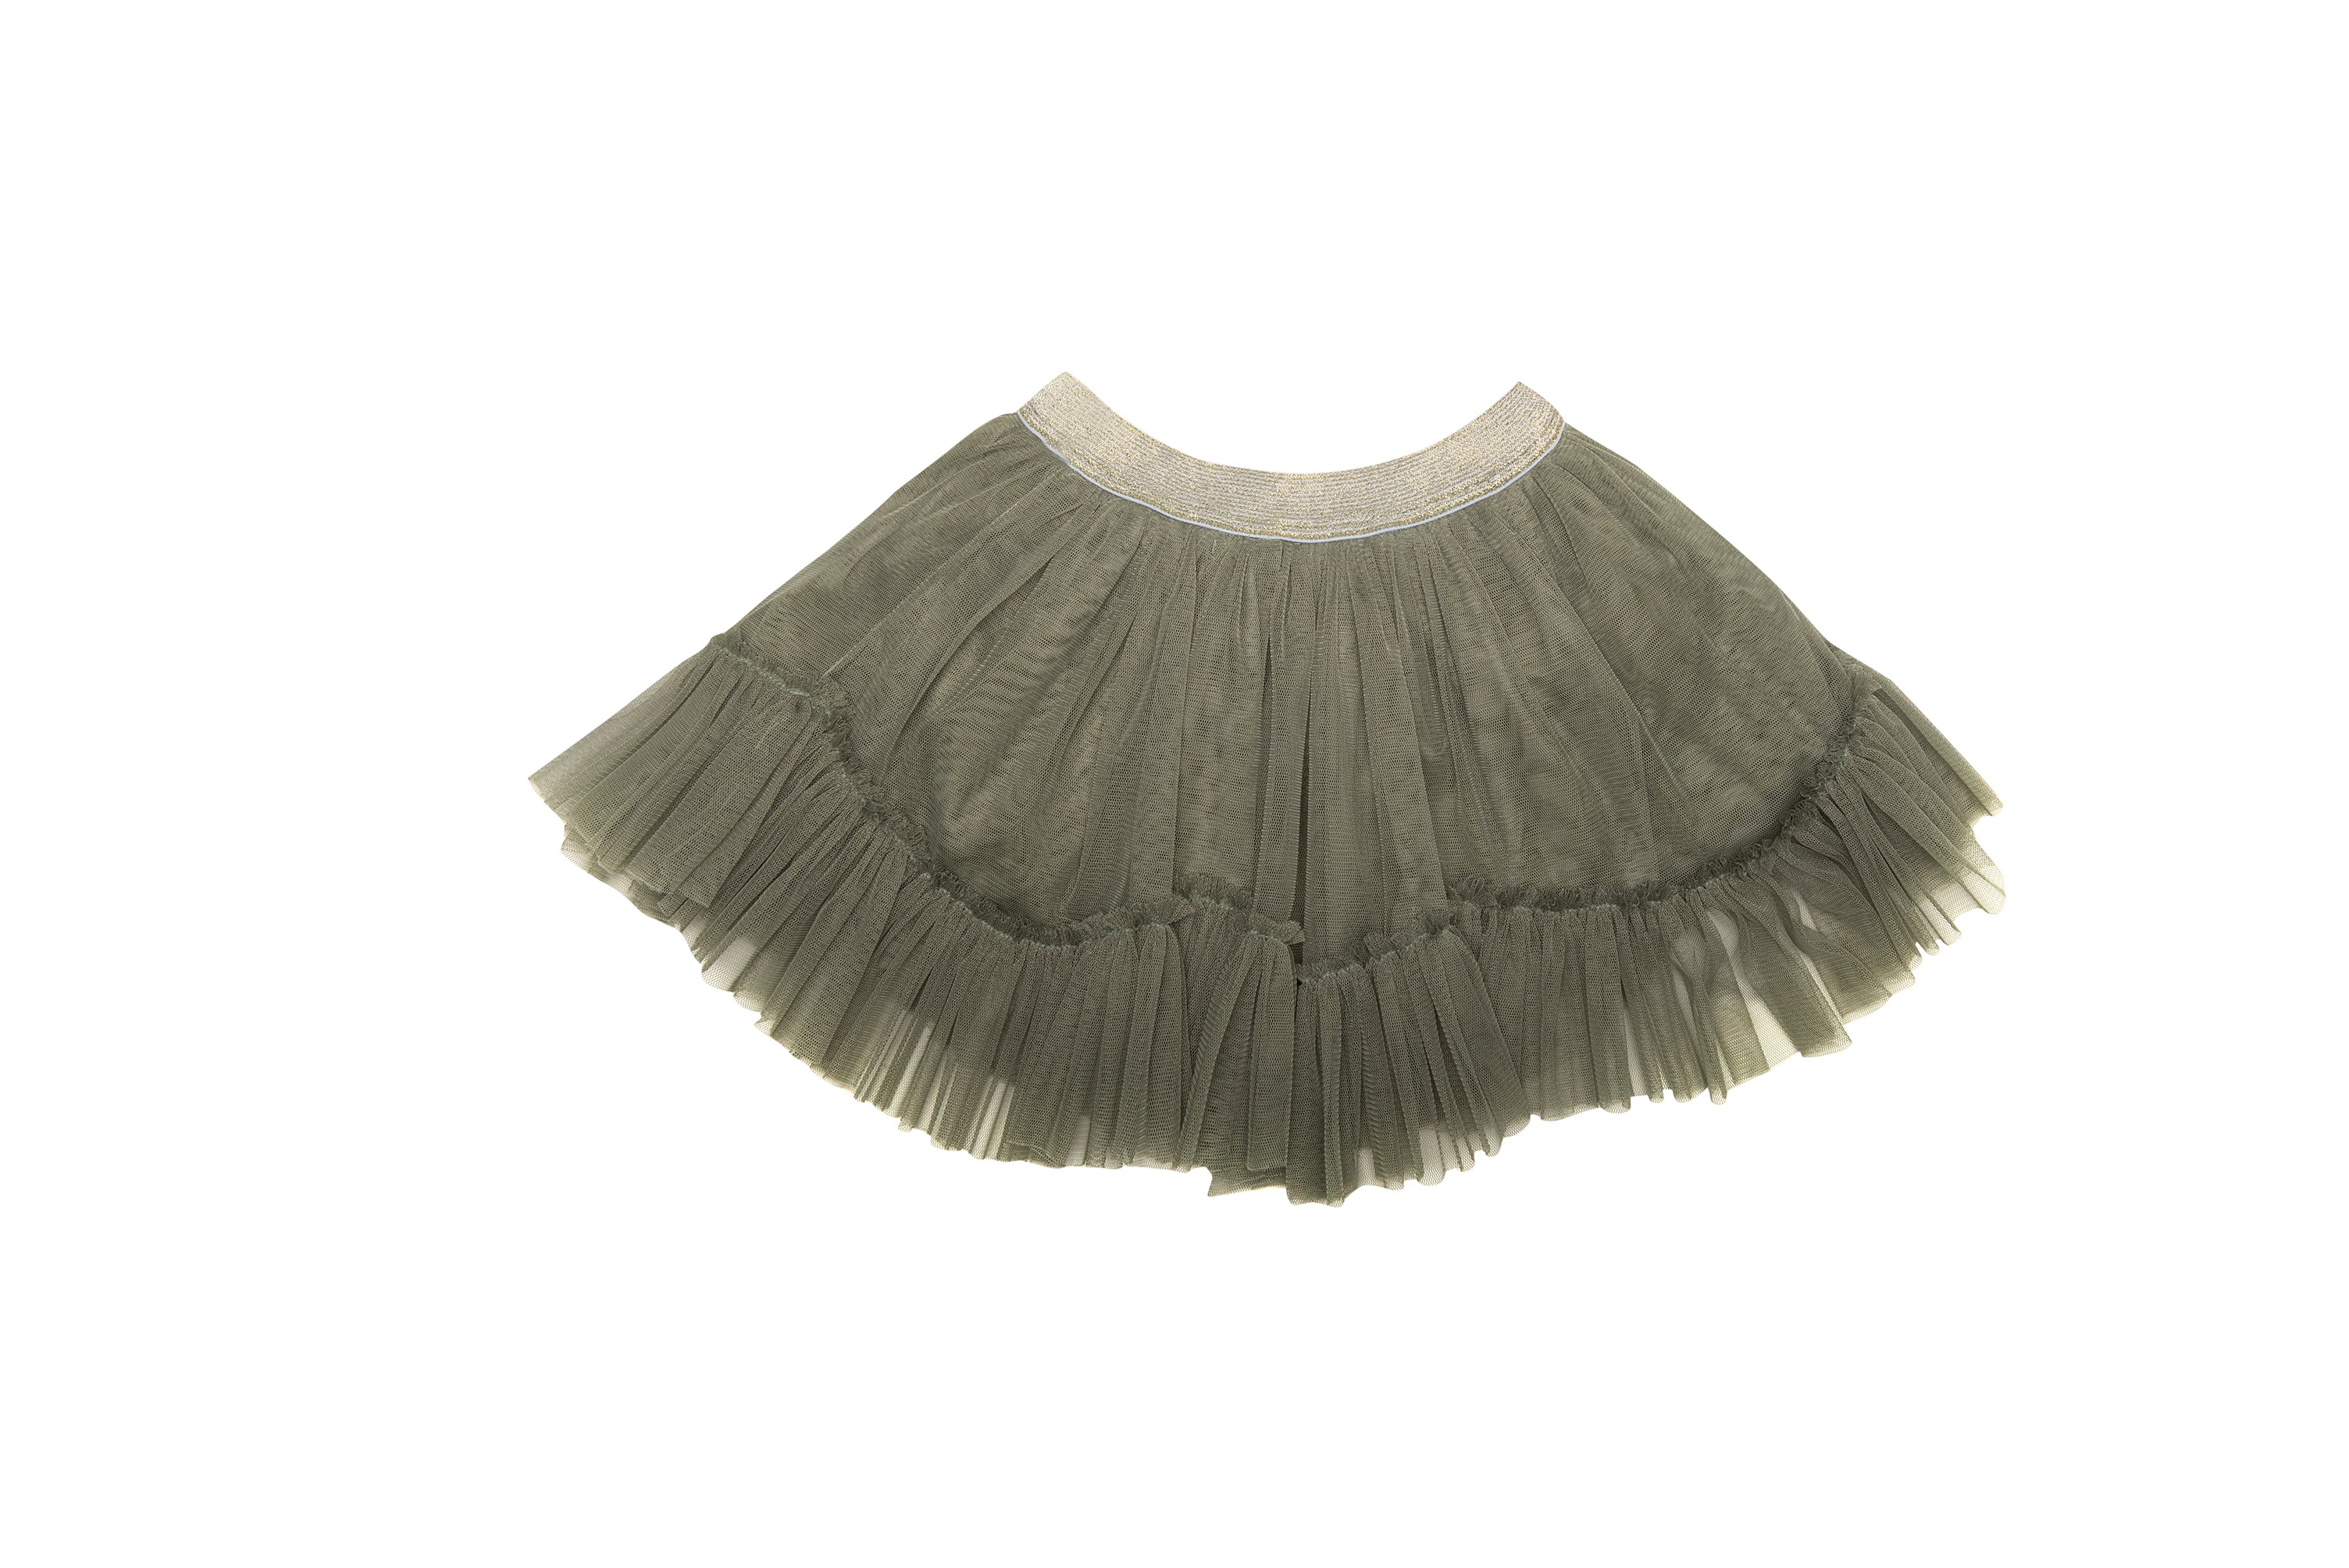 Black Tulle Topshop Skirts, Black Alma Bb Louis Vuitton Bags, Ruffles x  Tulle by quennandher